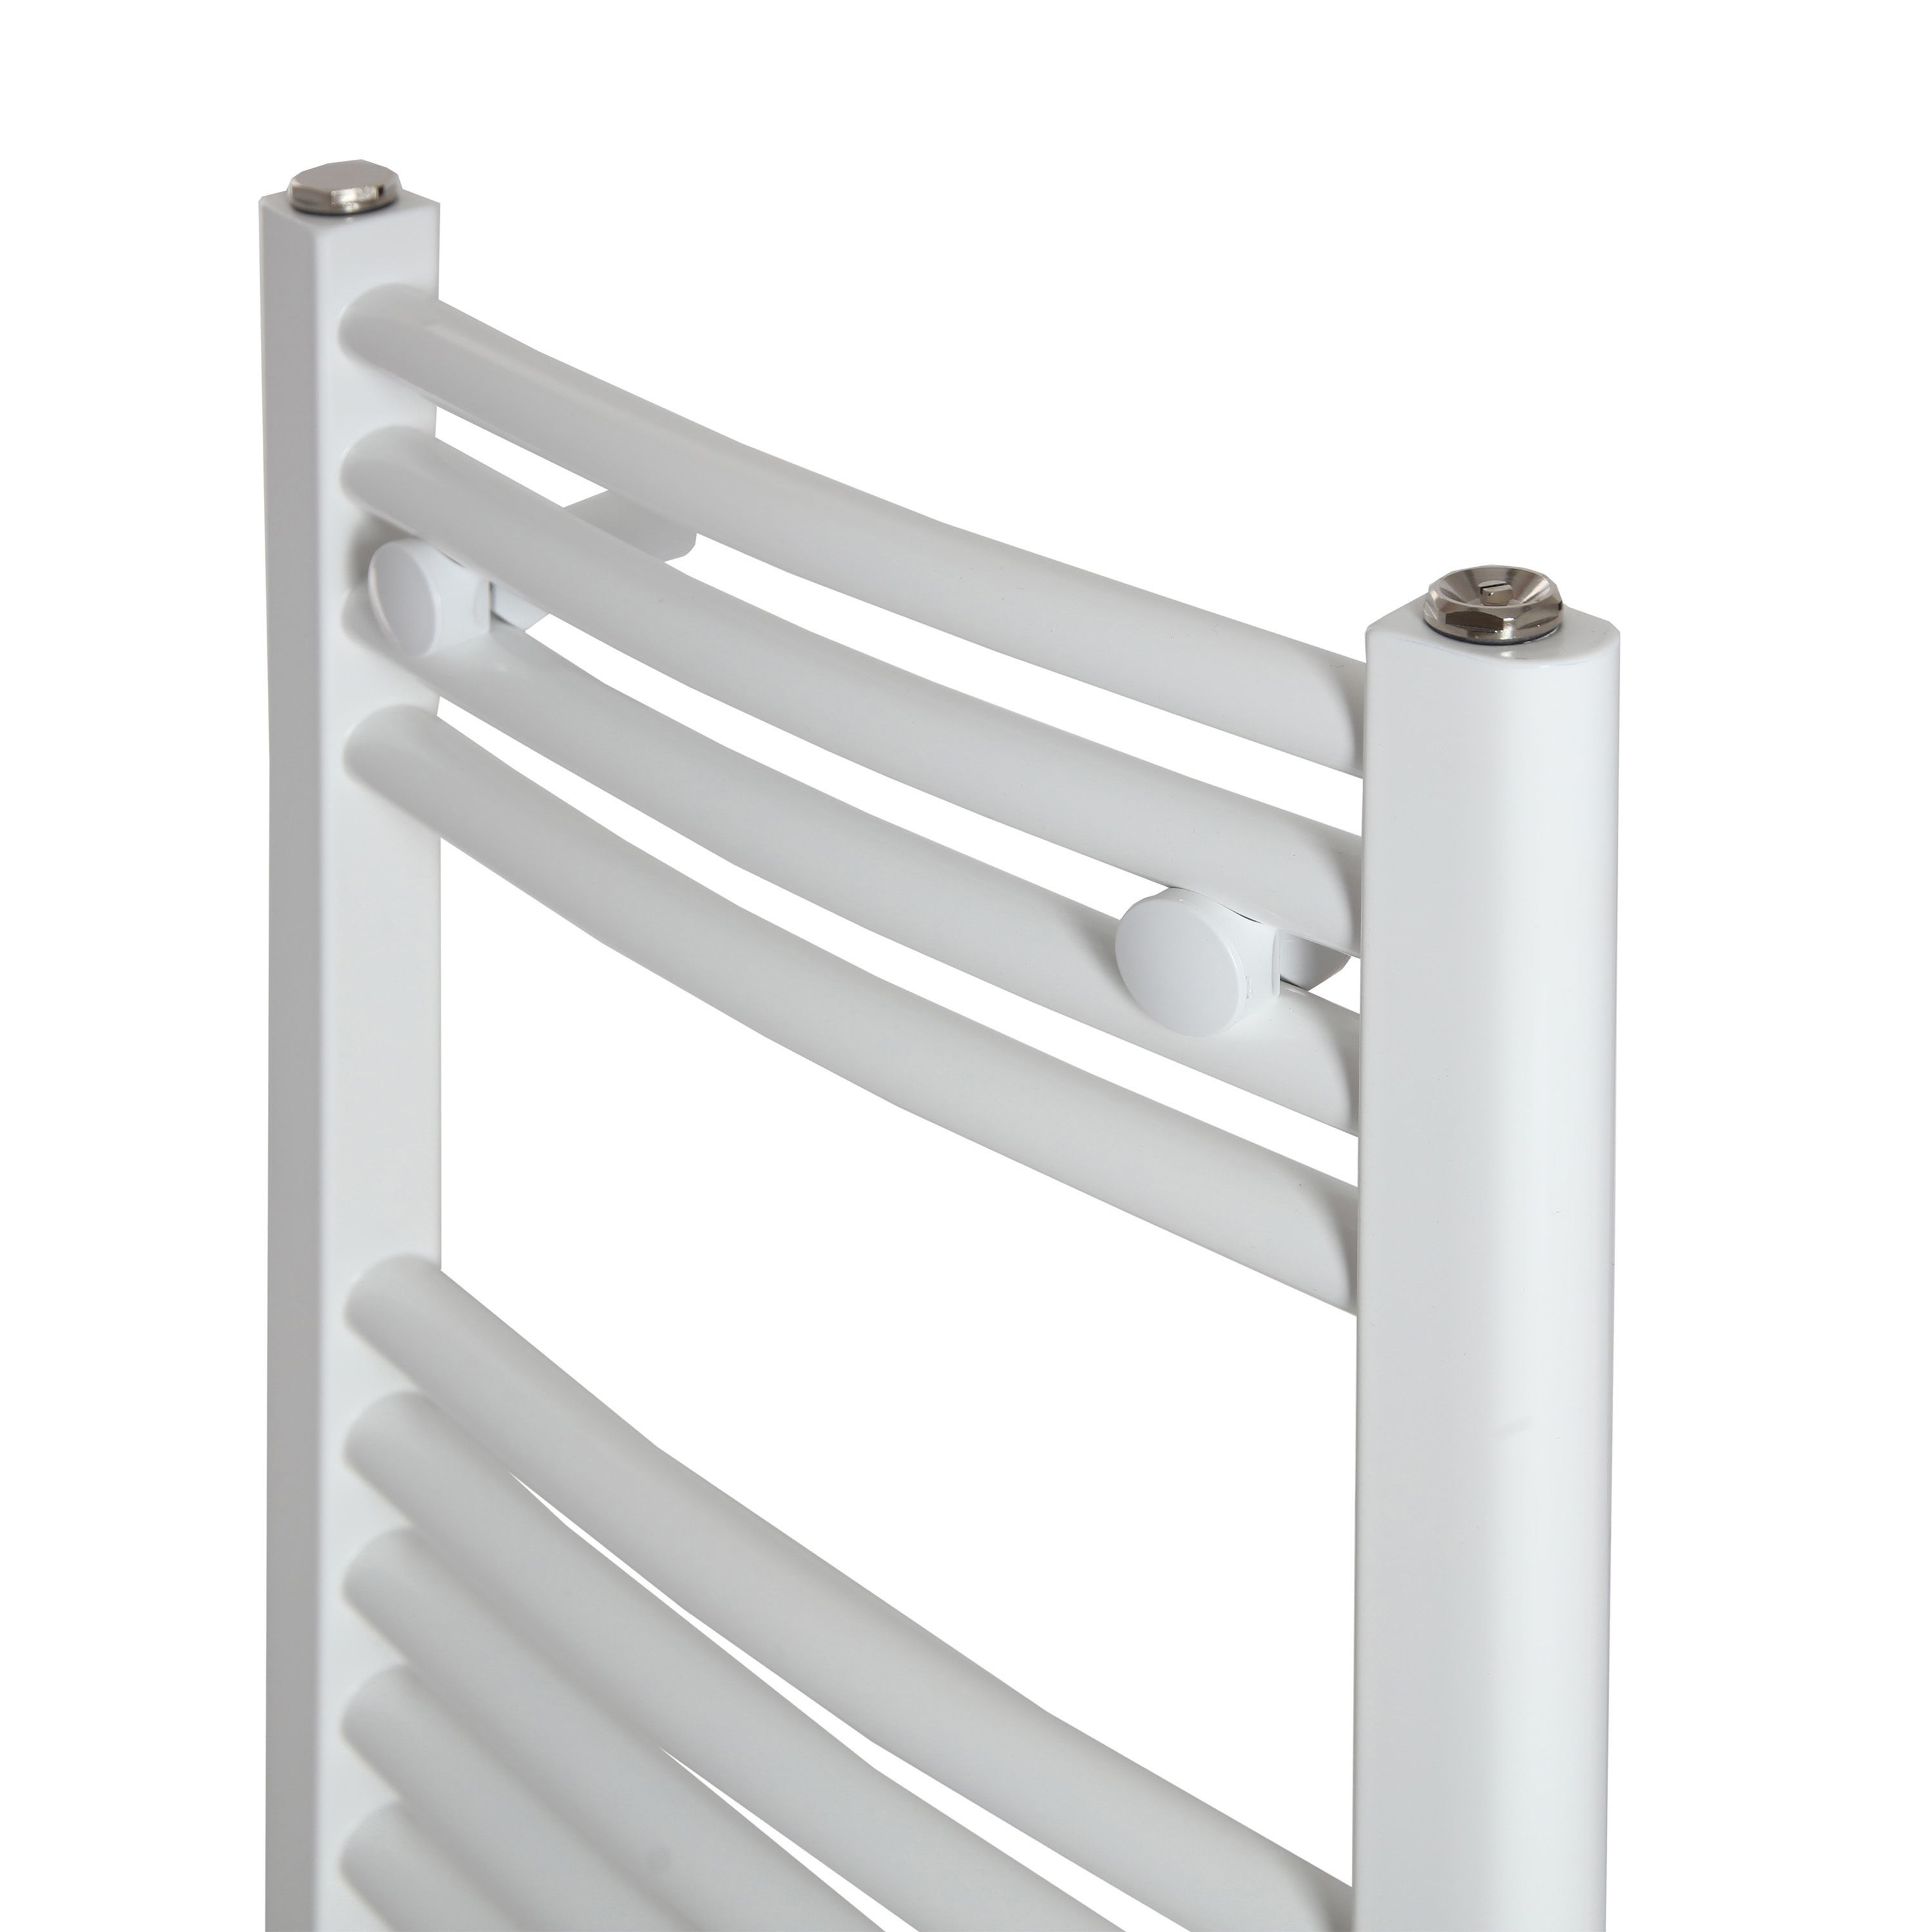 Flomasta Curved, White Vertical Towel radiator (W)400mm x (H)700mm